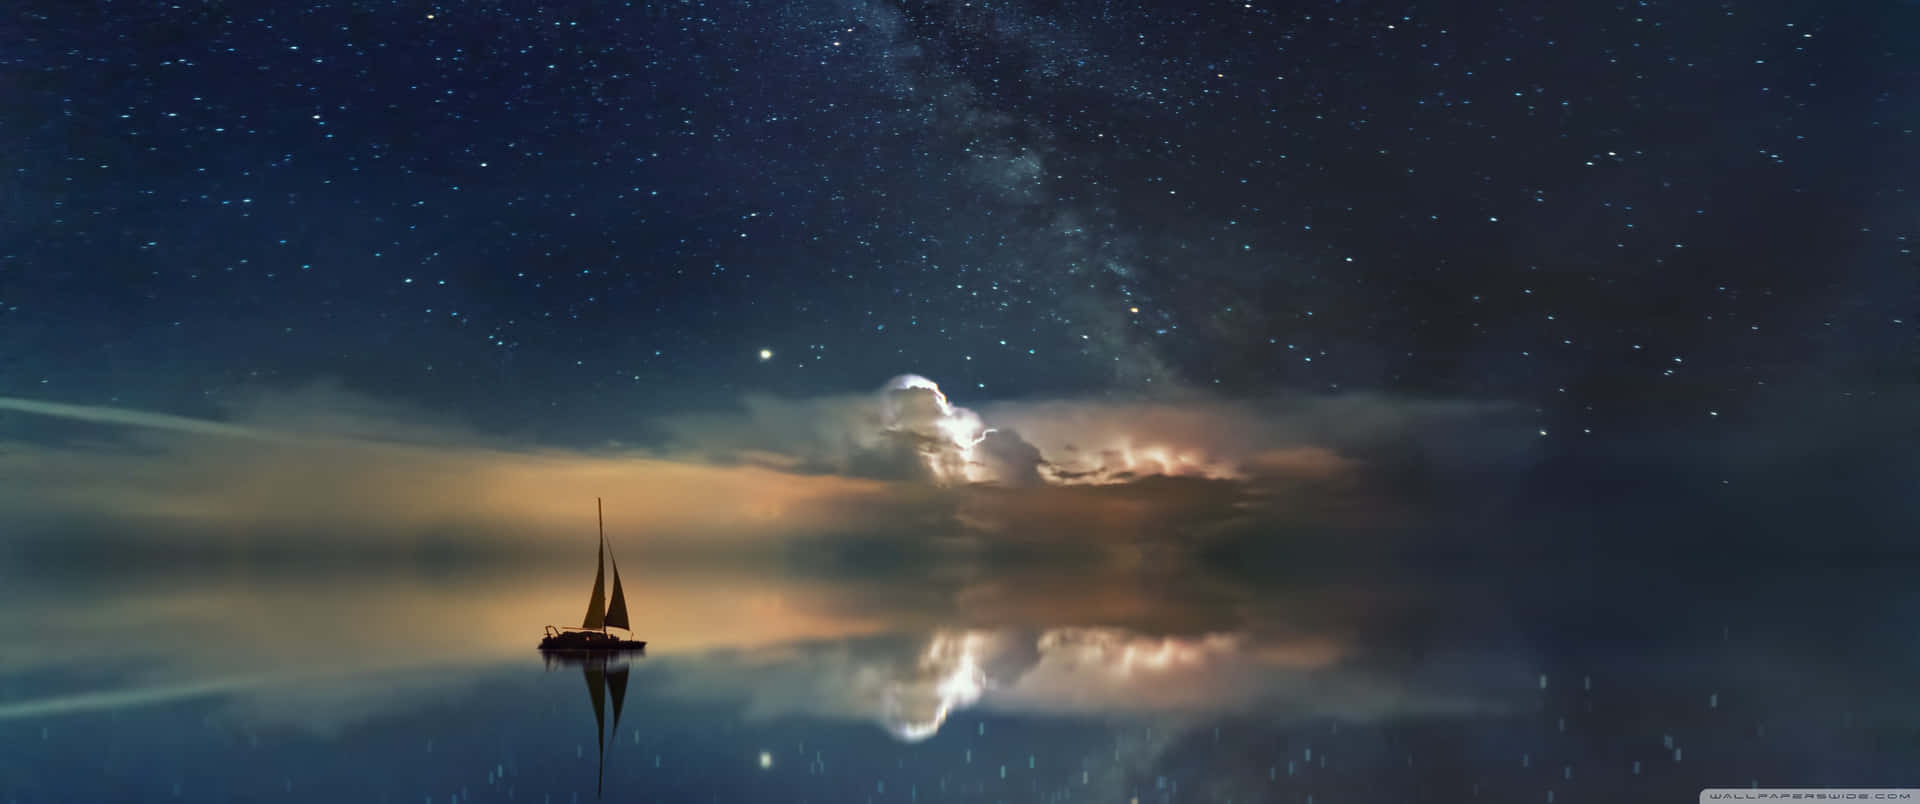 Ultra Wide 3440 X 1440 Space Sailboat Wallpaper